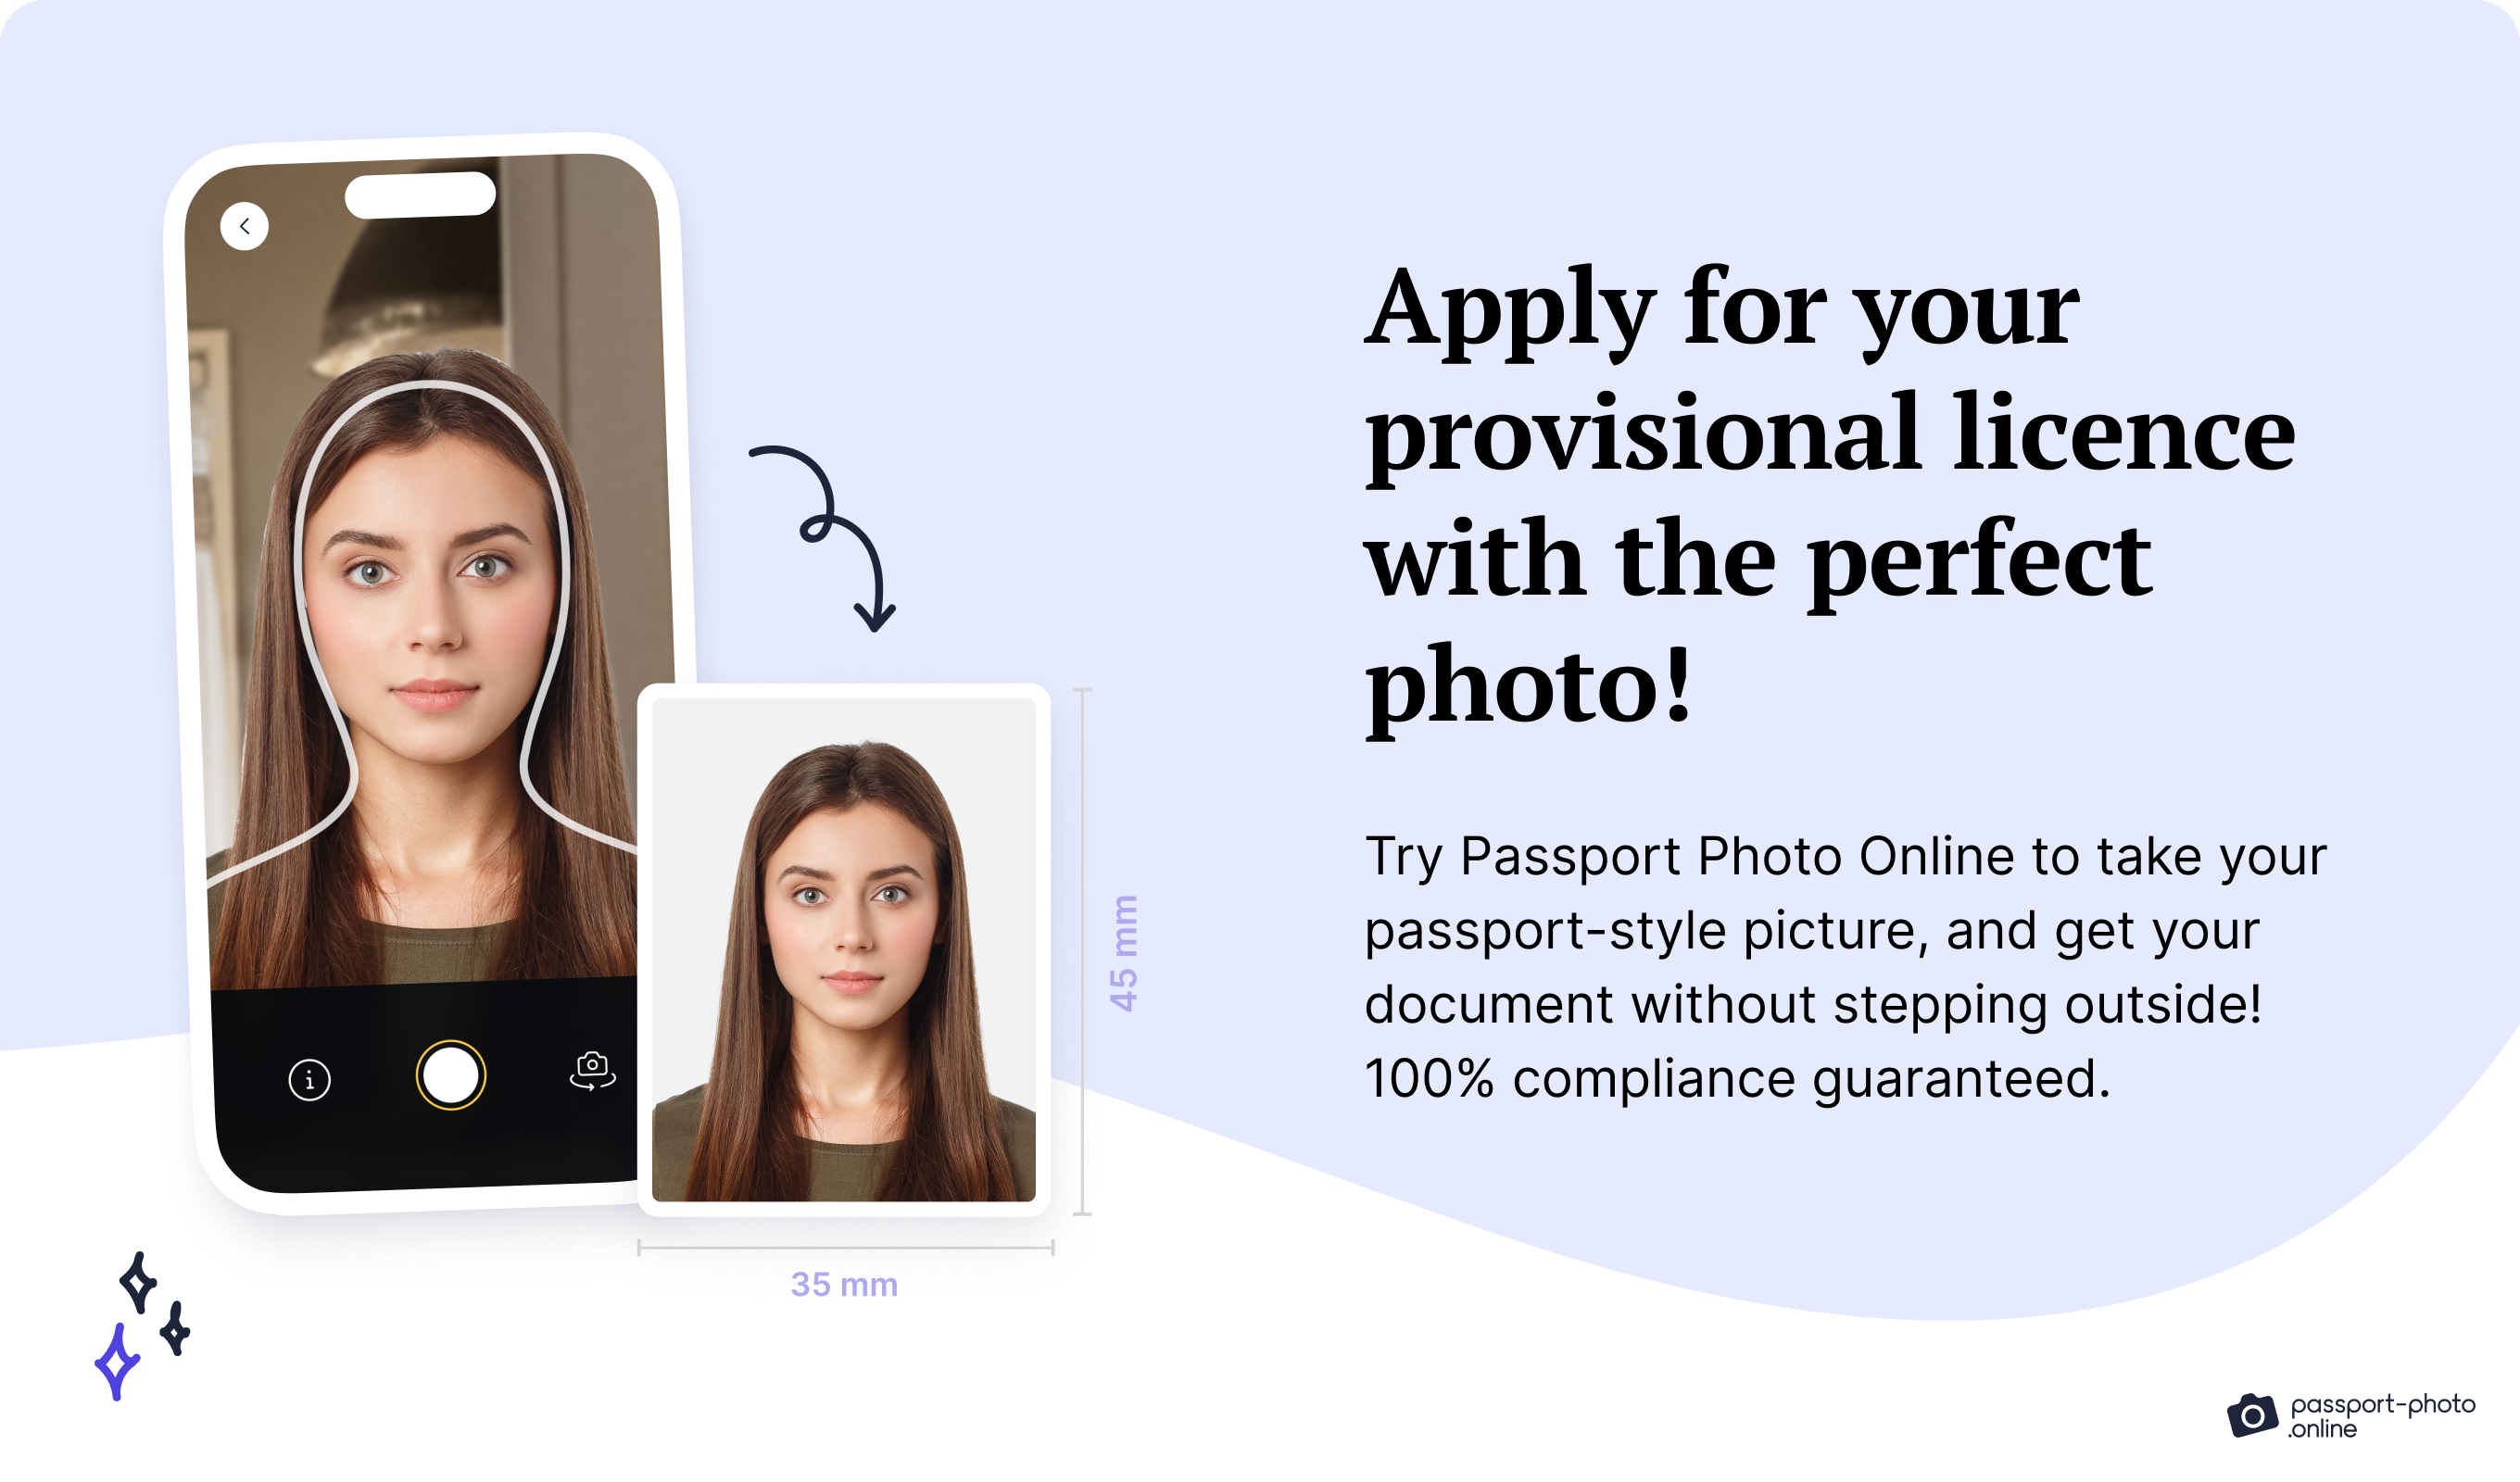 Getting a passport-style picture with Passport Photo Online.